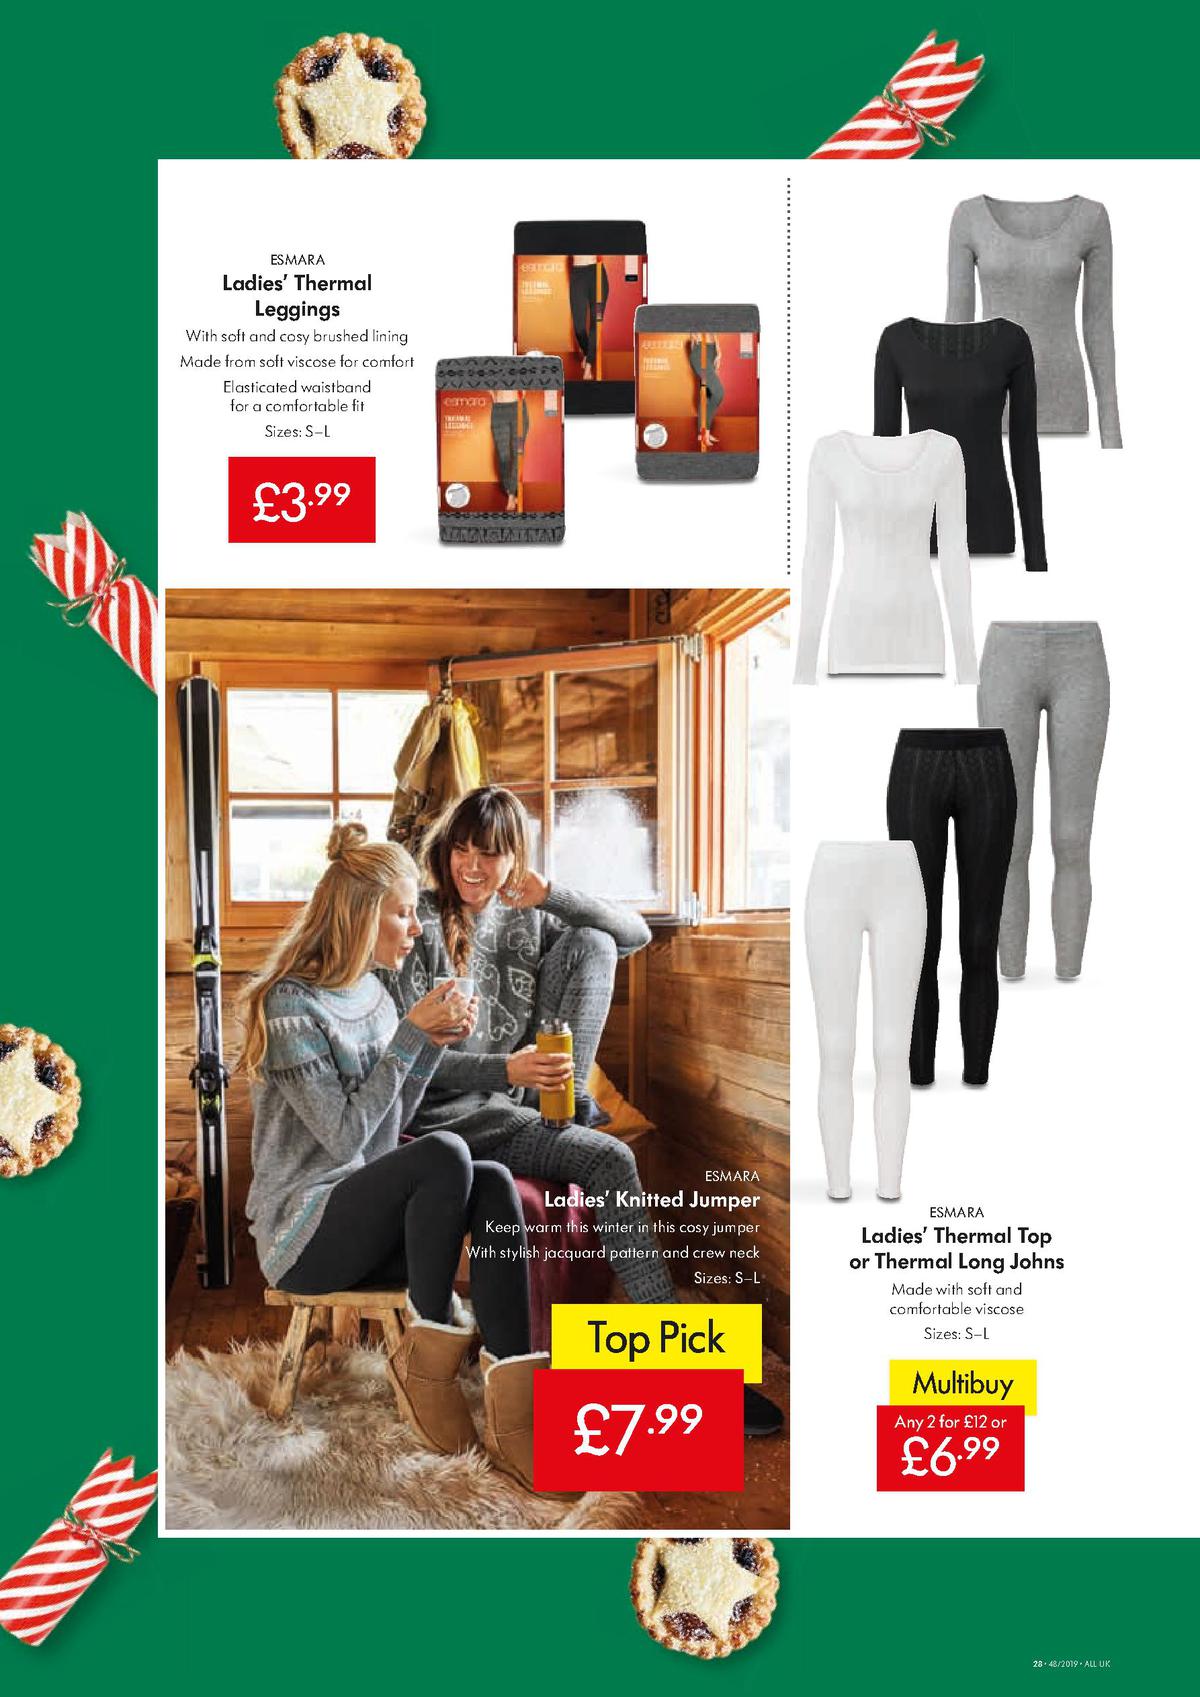 LIDL Offers from 28 November